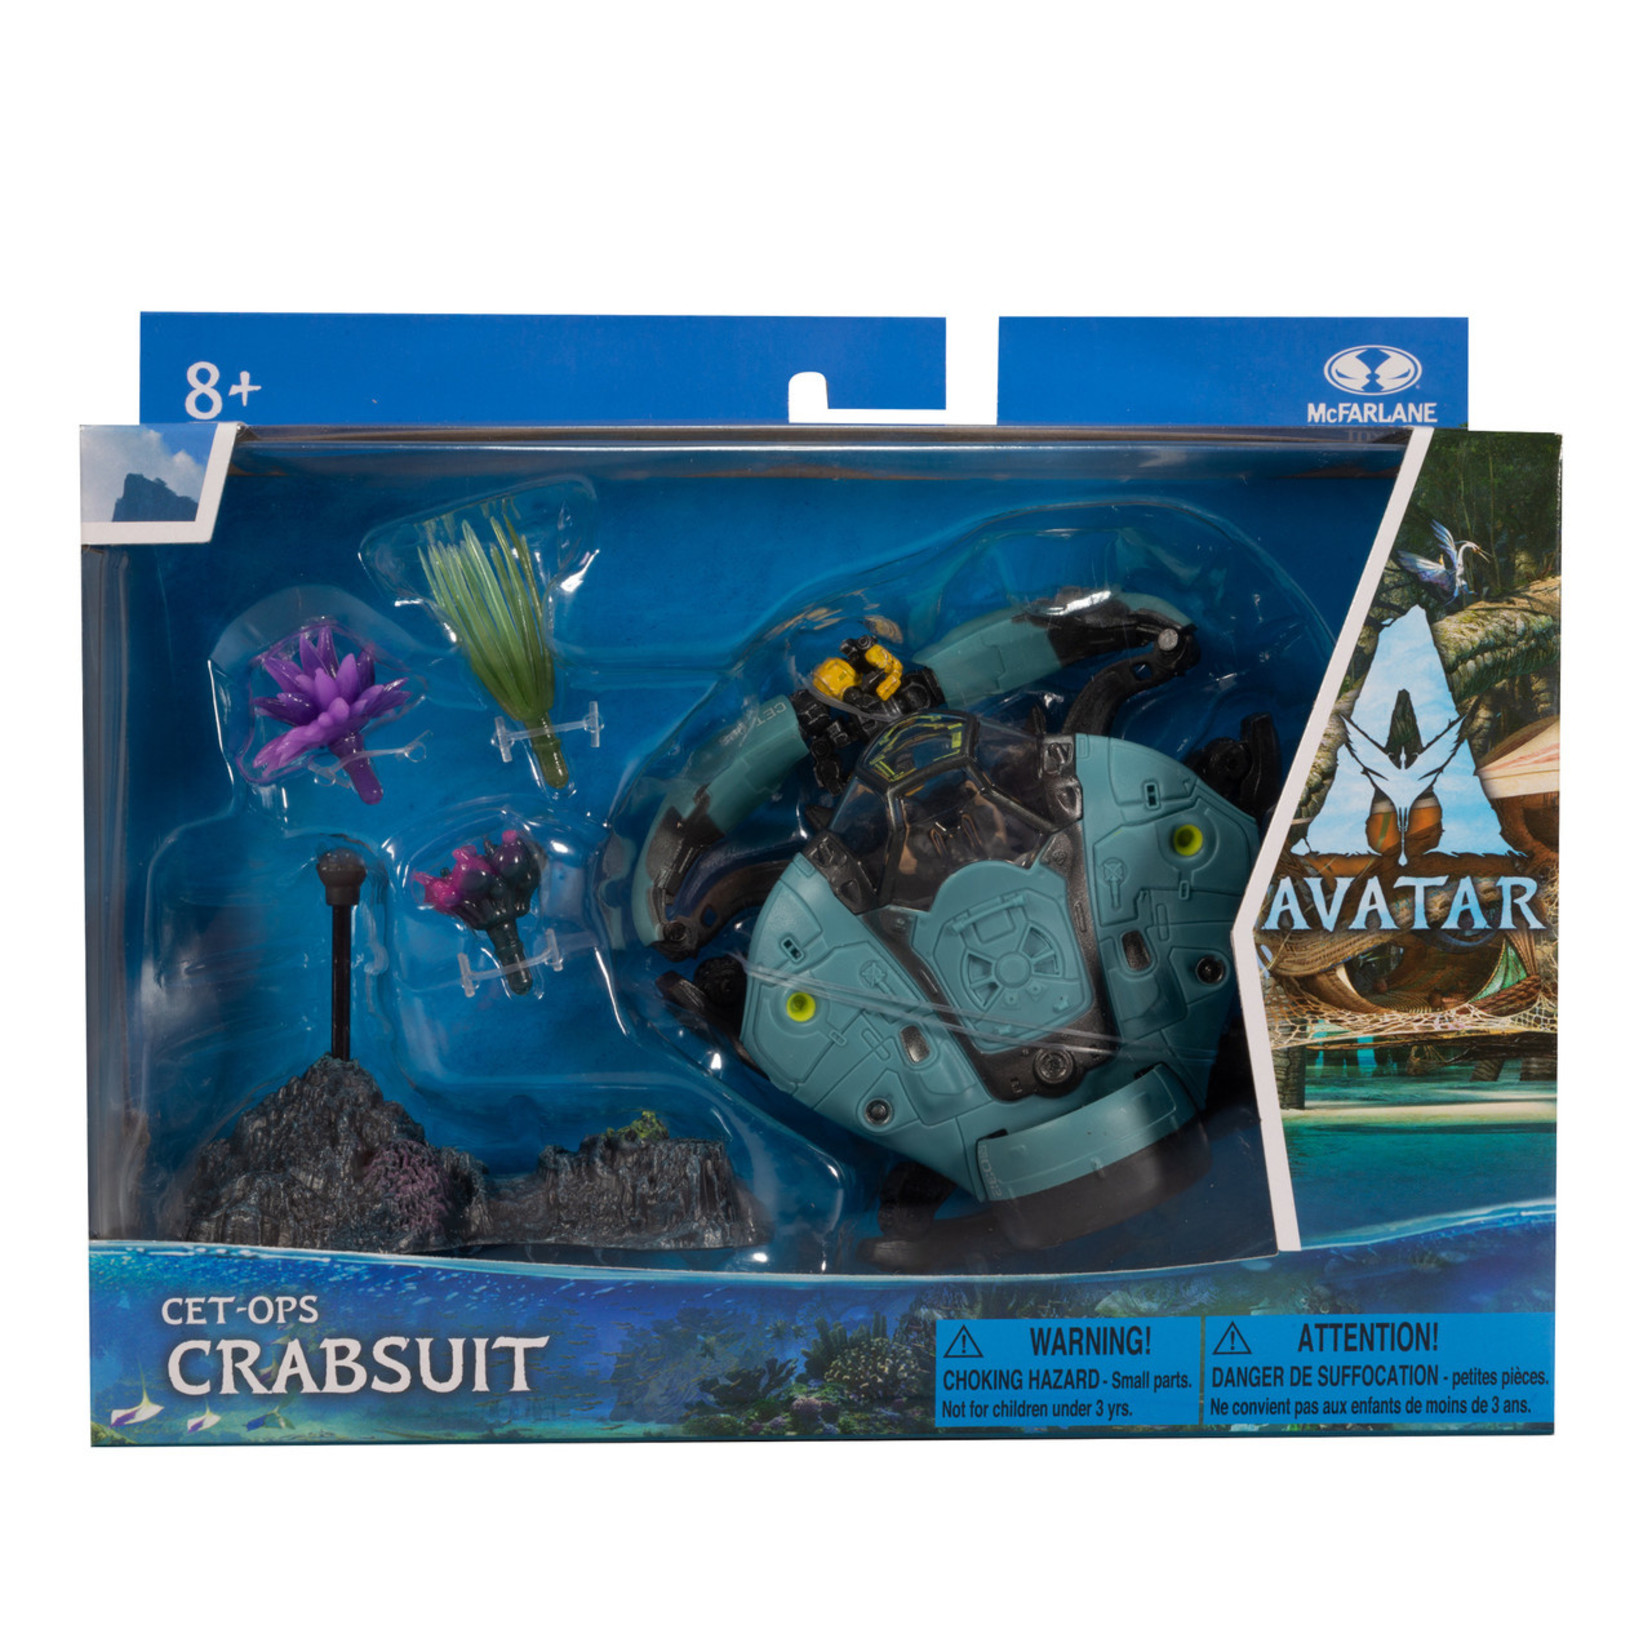 McFarlane Toys McFarlane Toys Avatar The Way Of Water Get-Ops Crabsuit